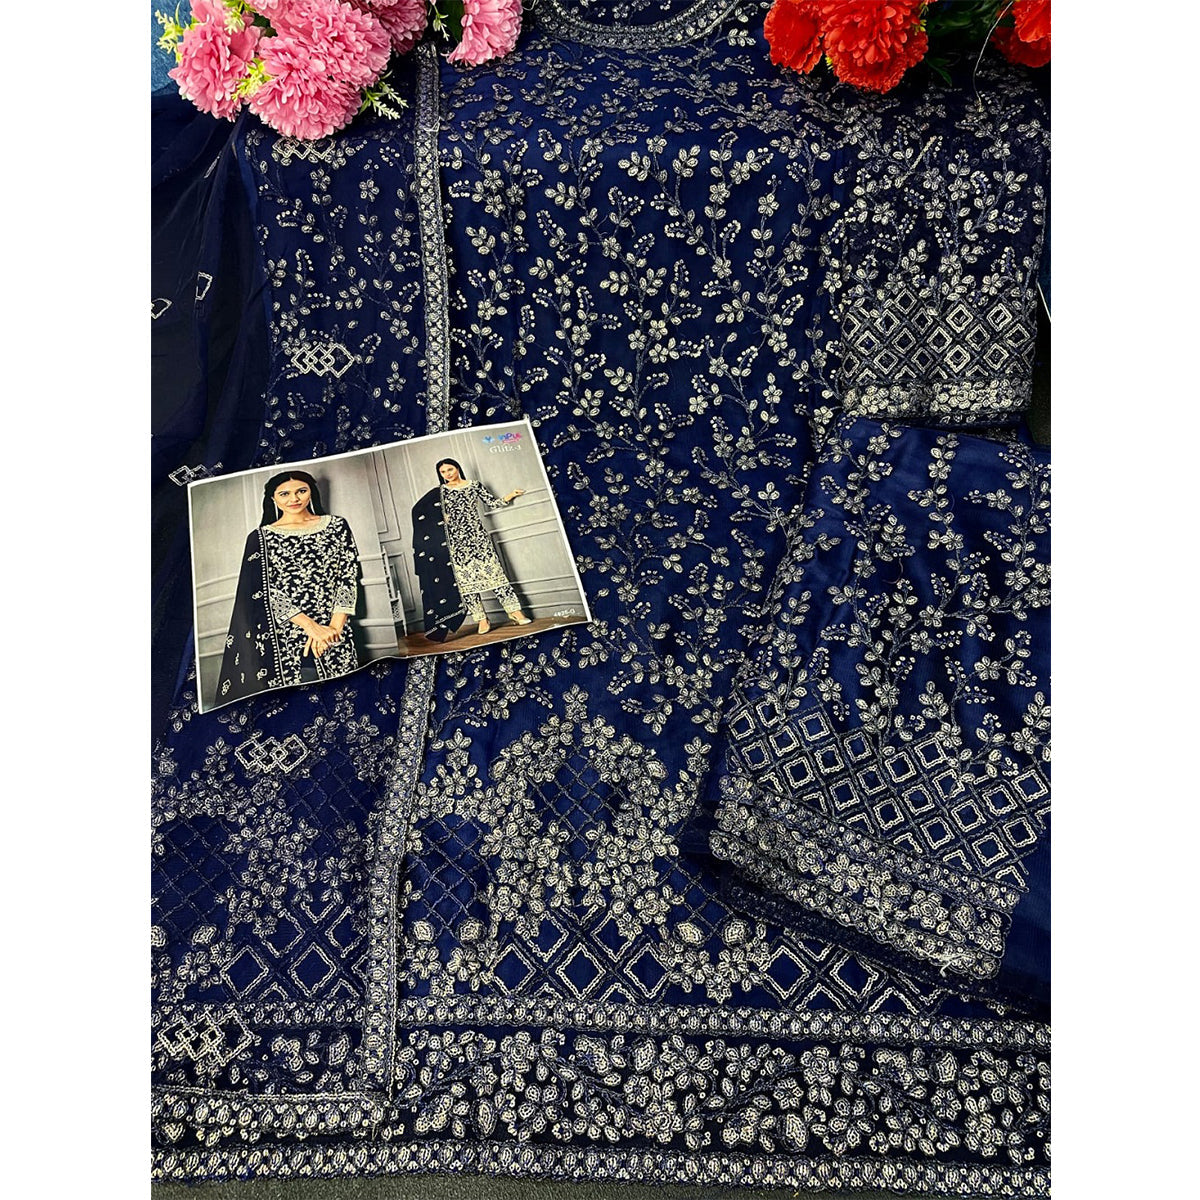 Shafnufab Butterfly Net Embroidery Pant Style Suit In Blue Colour